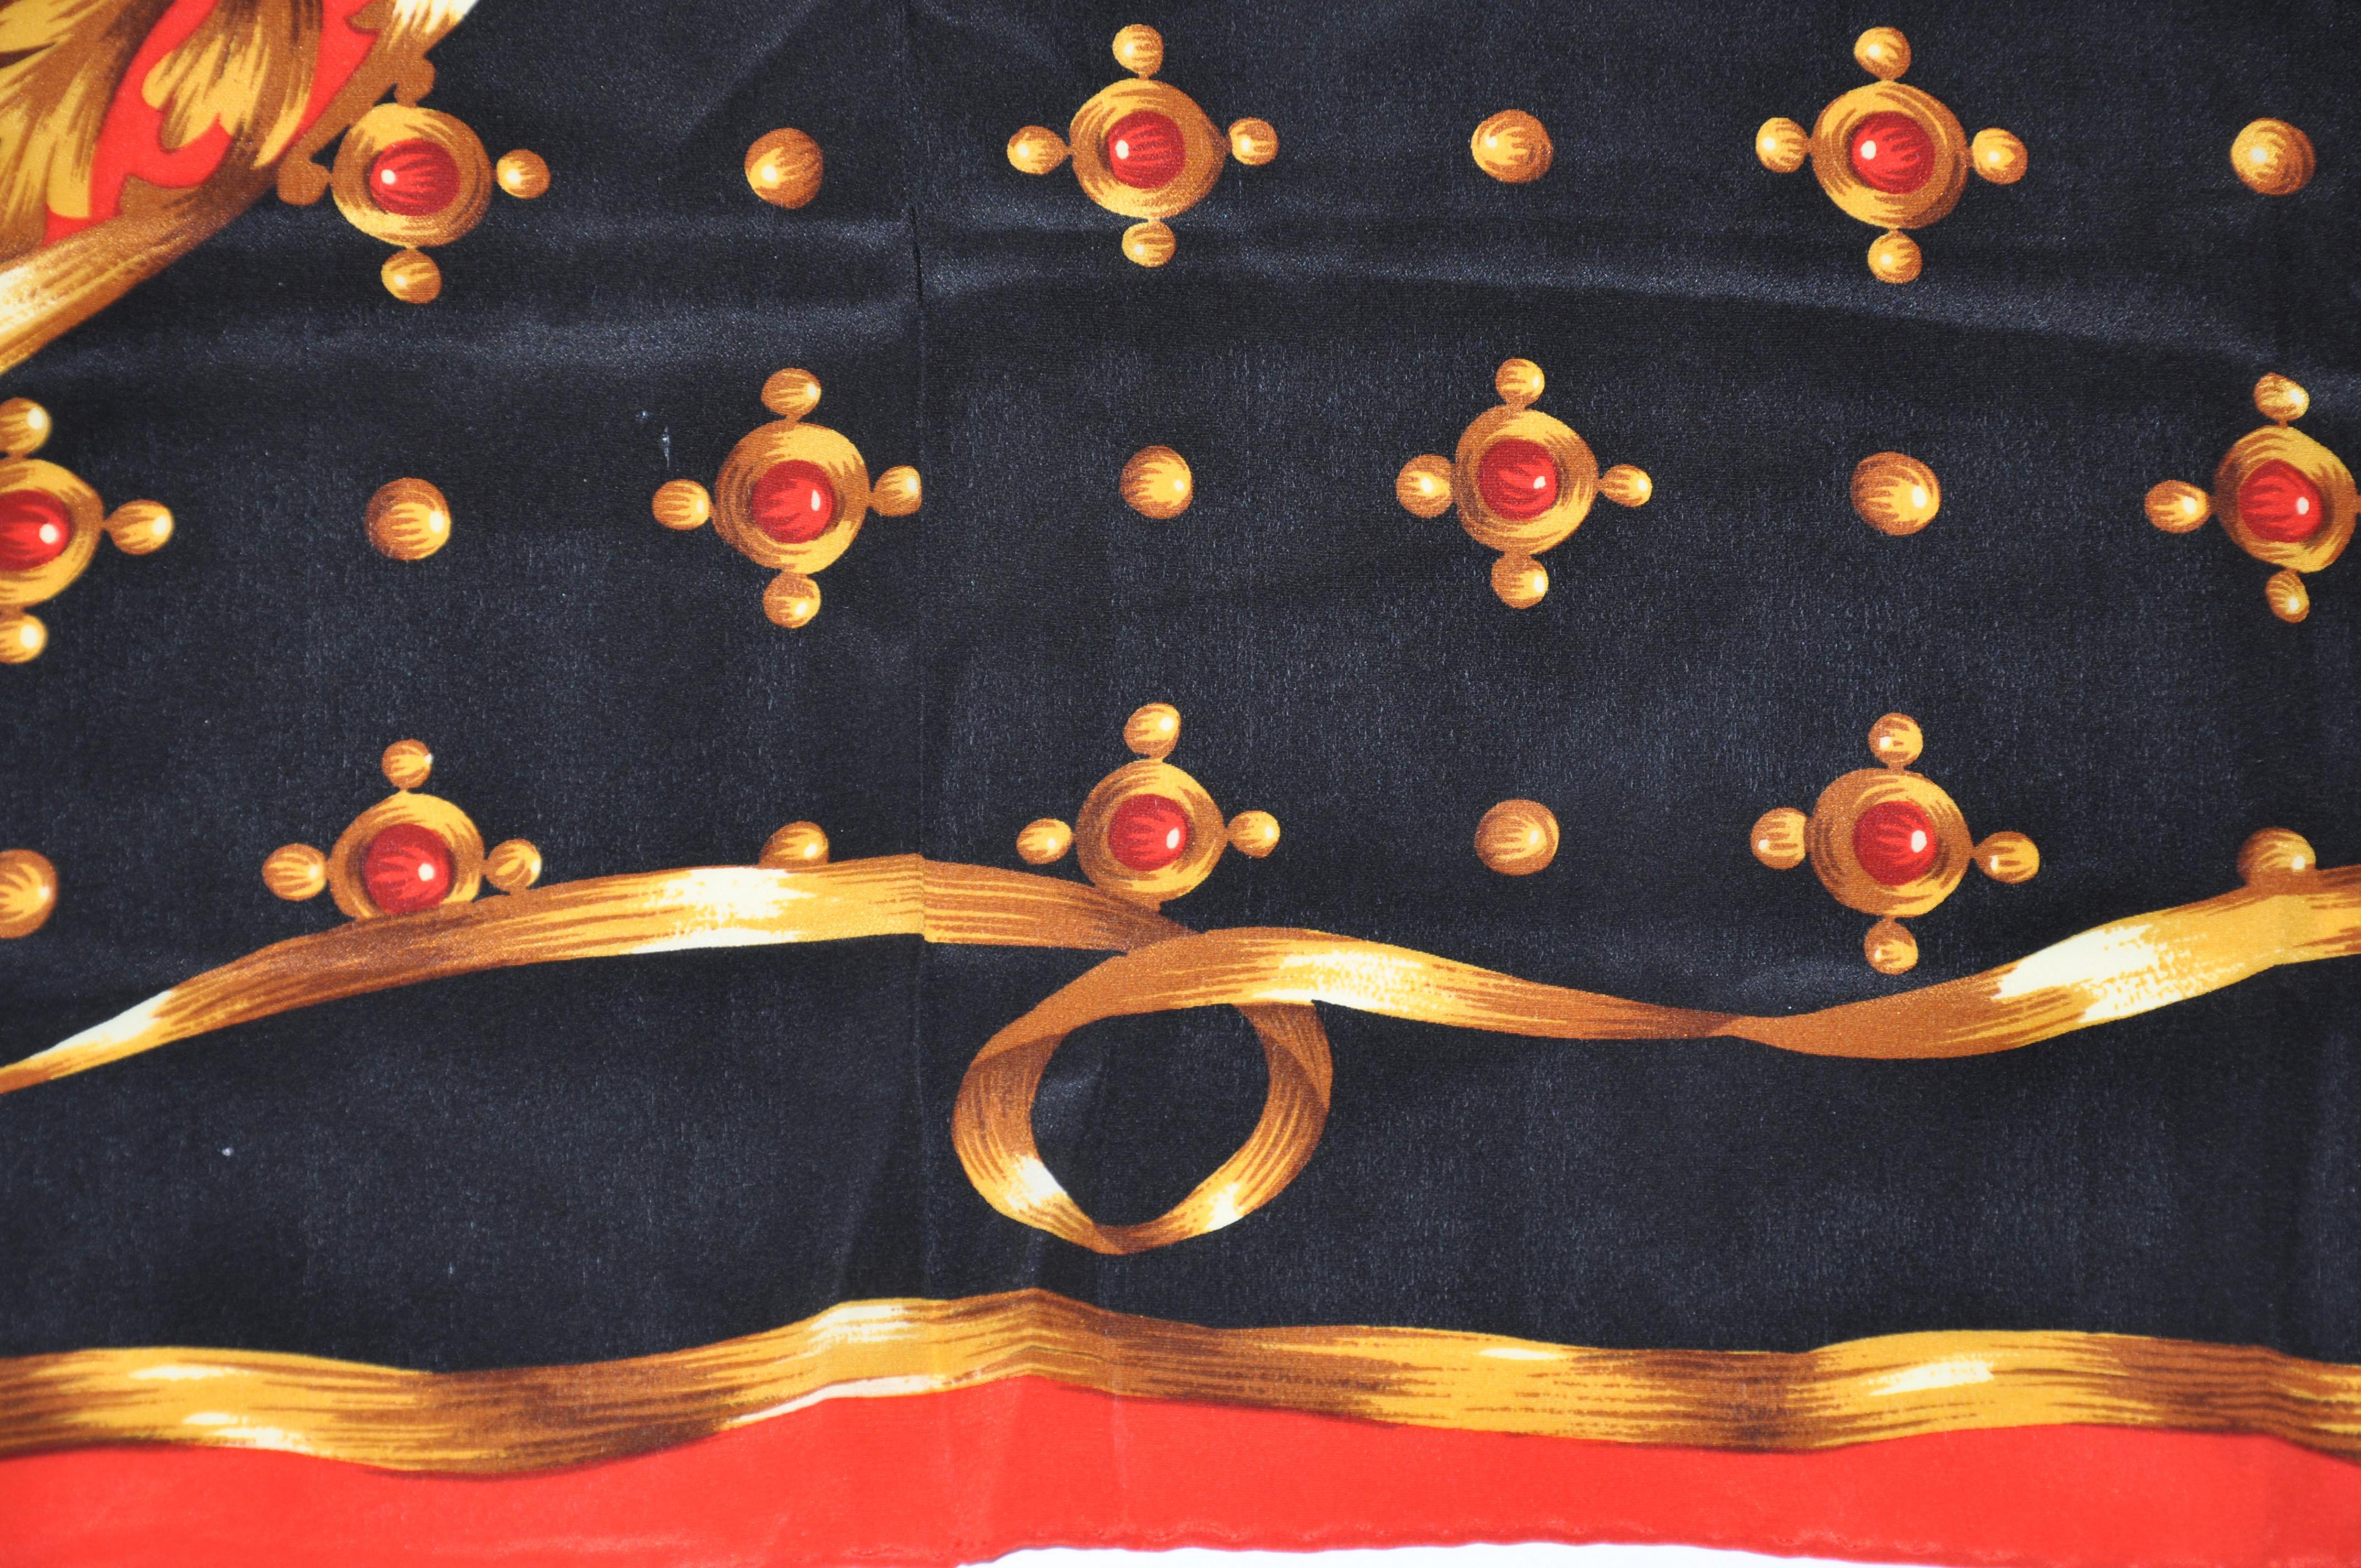 Large Royal Red Borders With Golden Accents Patterned Silk Scarf For Sale 1